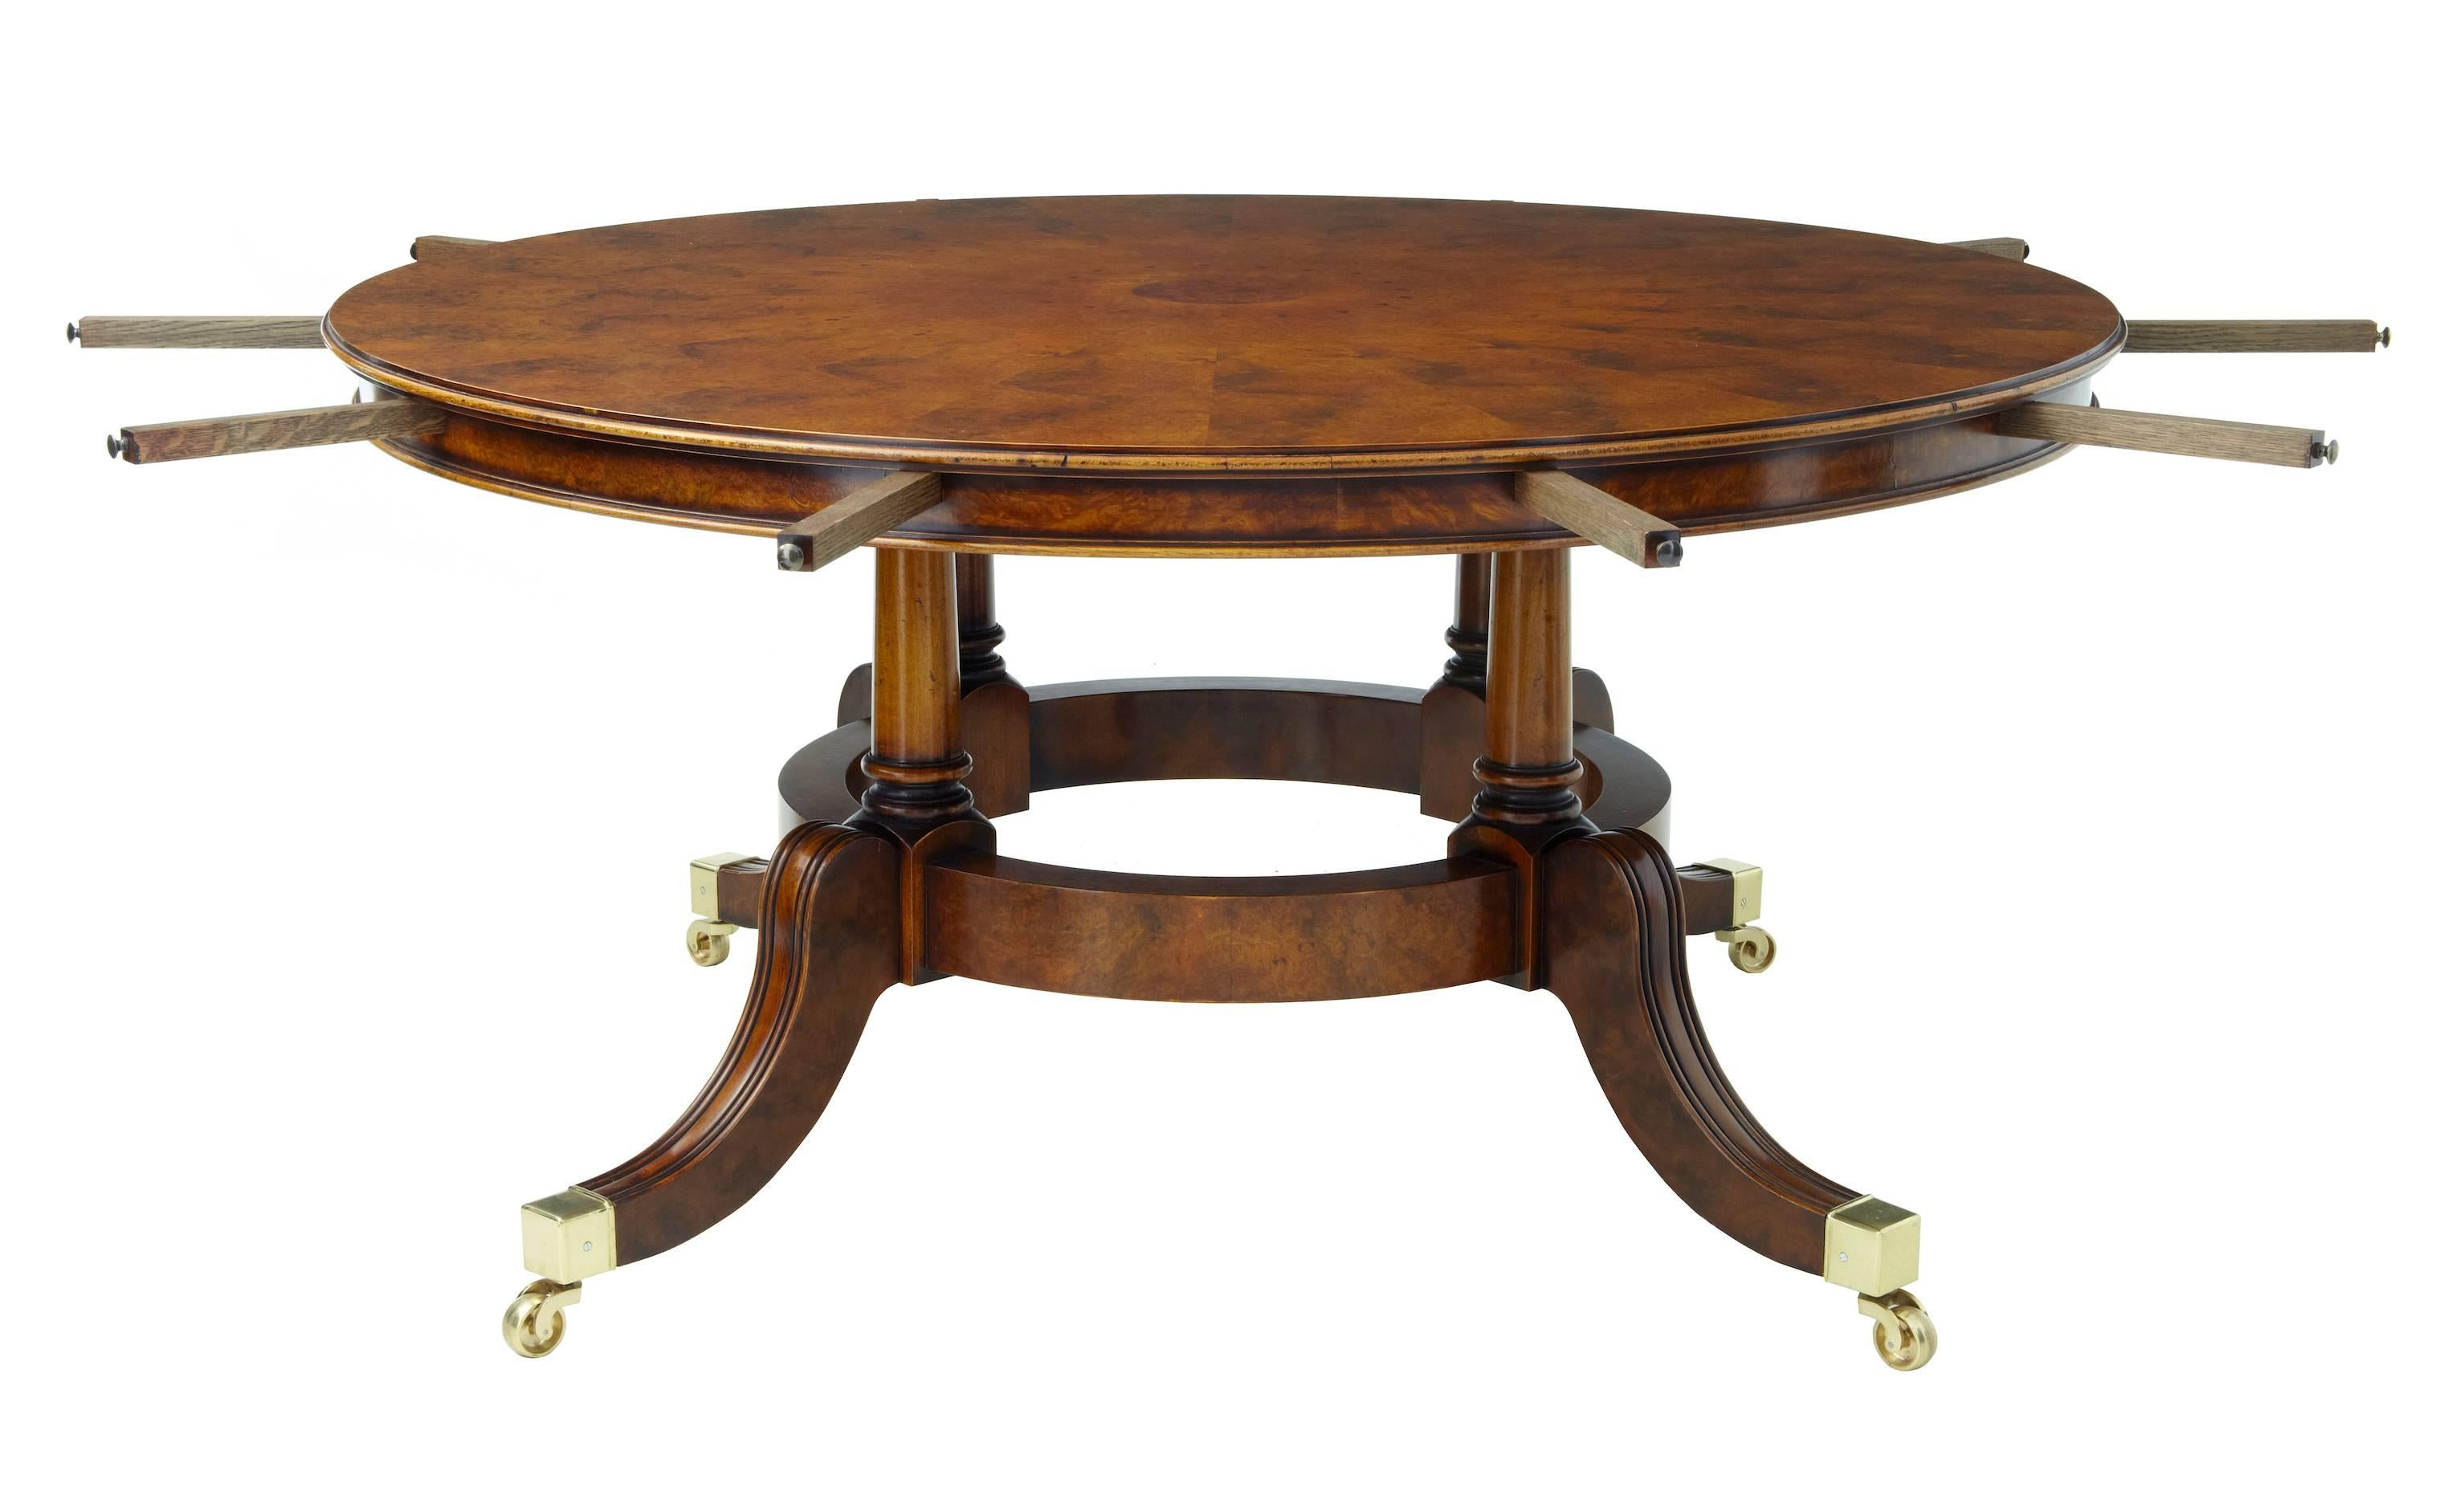 Fine quality walnut veneered Jupe table.
Can be used without leaves or for larger occasions with leaves to seat 12-14.
Segmented veneers used.
Five leaves which lock together to increase the table diameter from 60